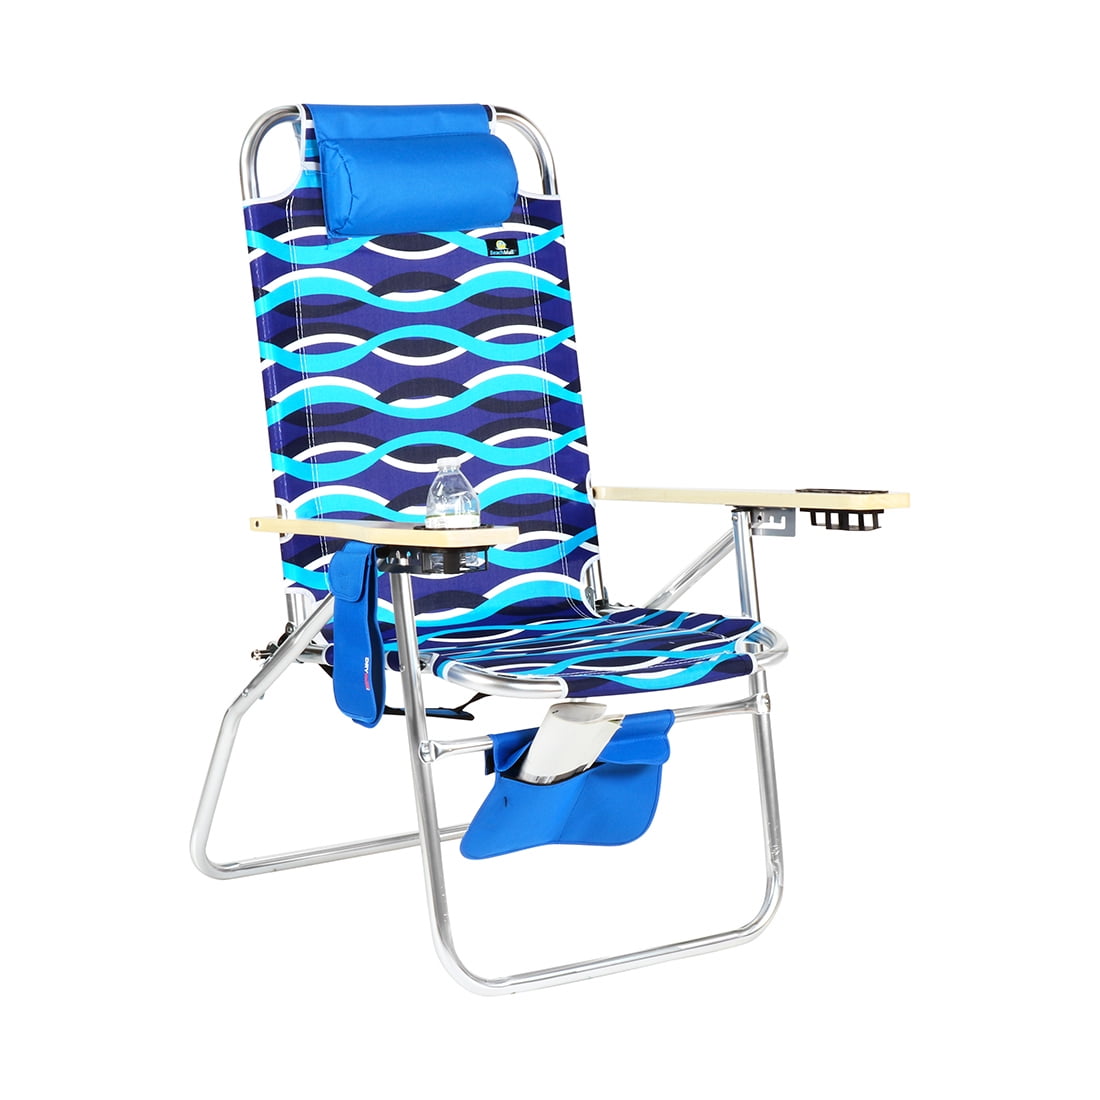 Minimalist 9 Inch Beach Chair for Small Space